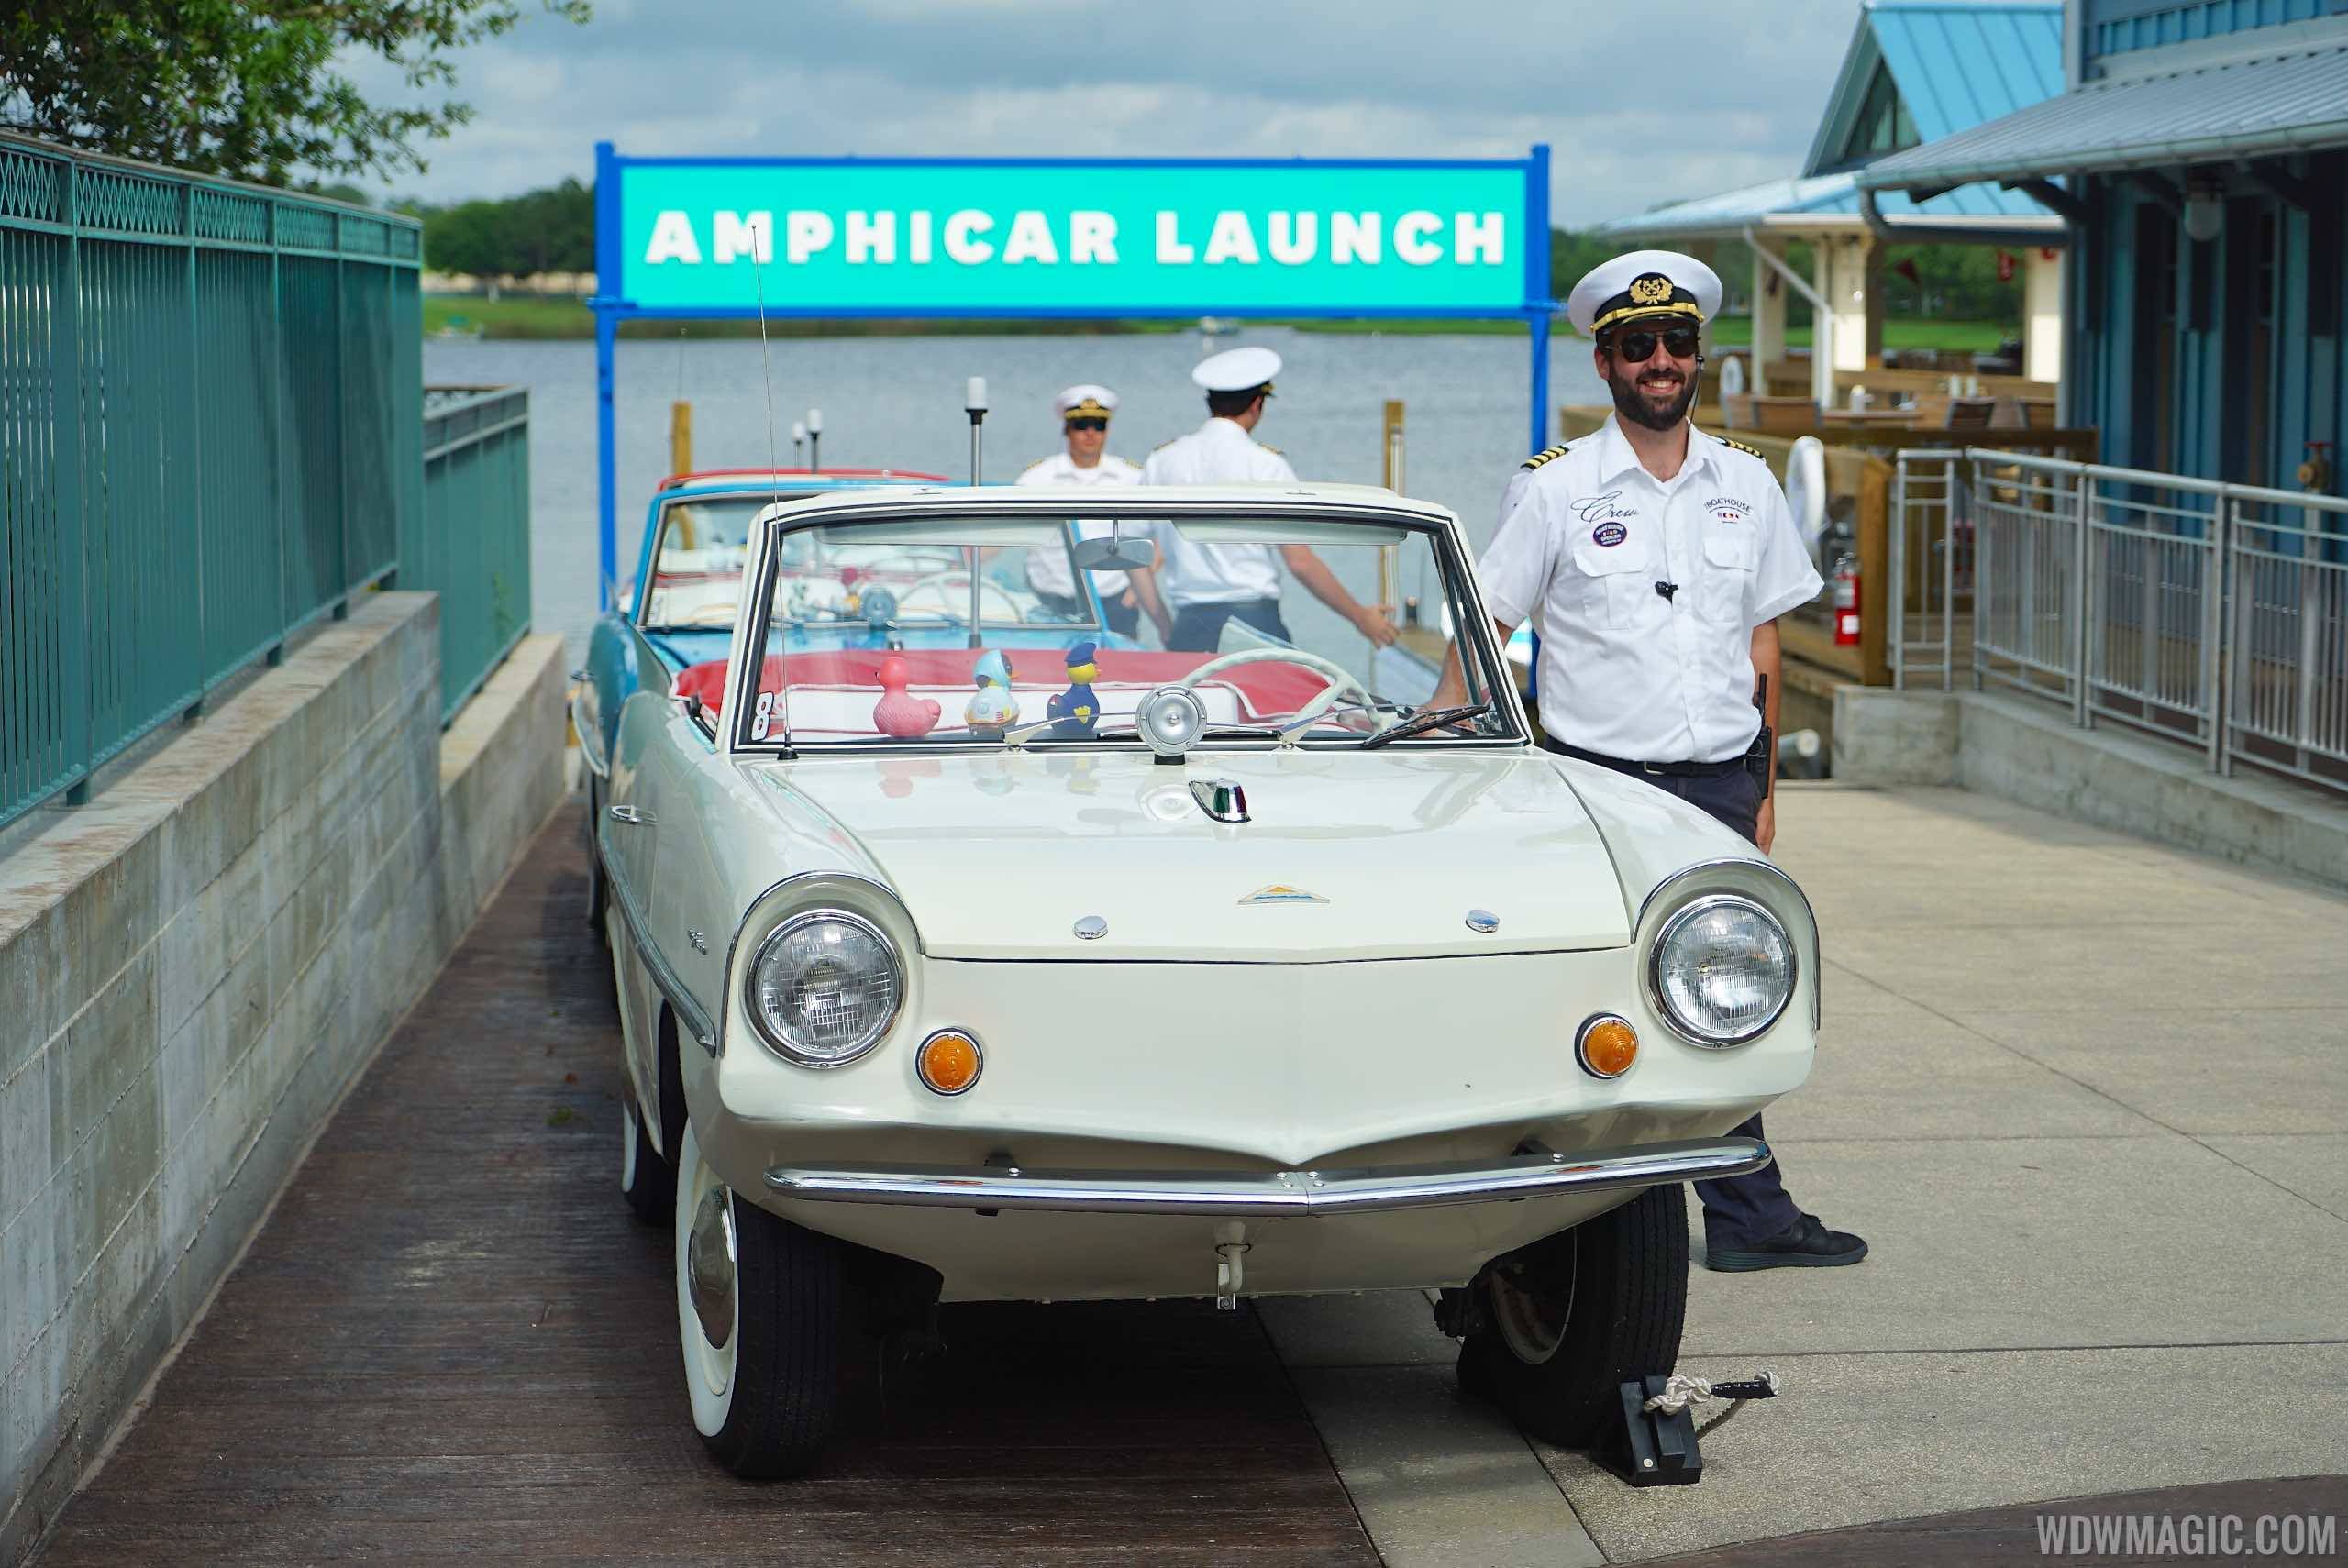 Amphicar at The BOATHOUSE